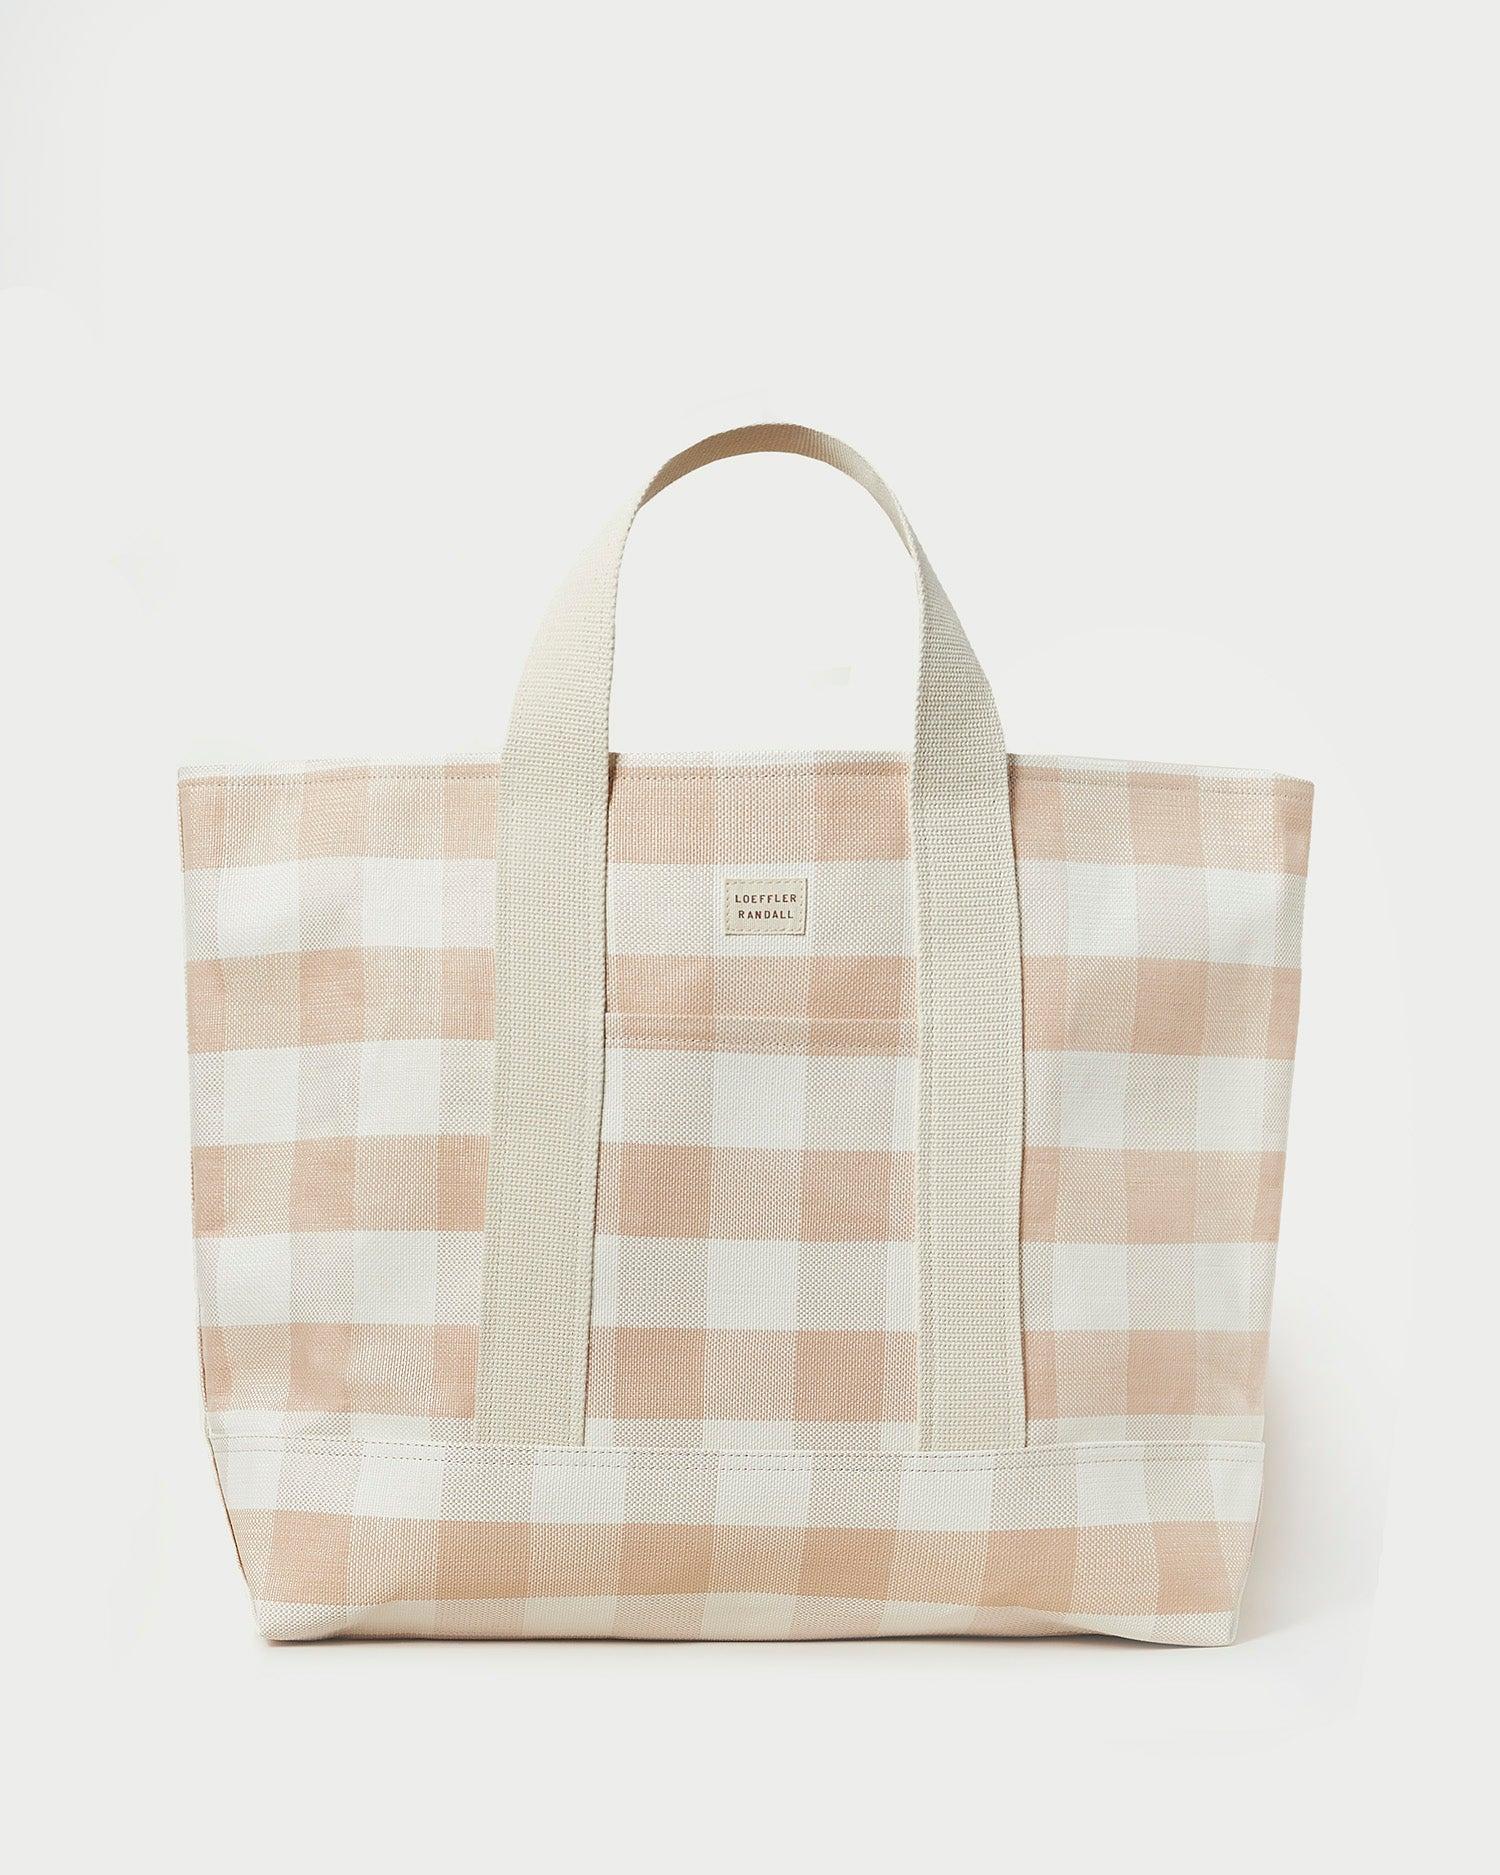 Loeffler Randall Bodie Blush Gingham Oversized Tote in Natural | Lyst